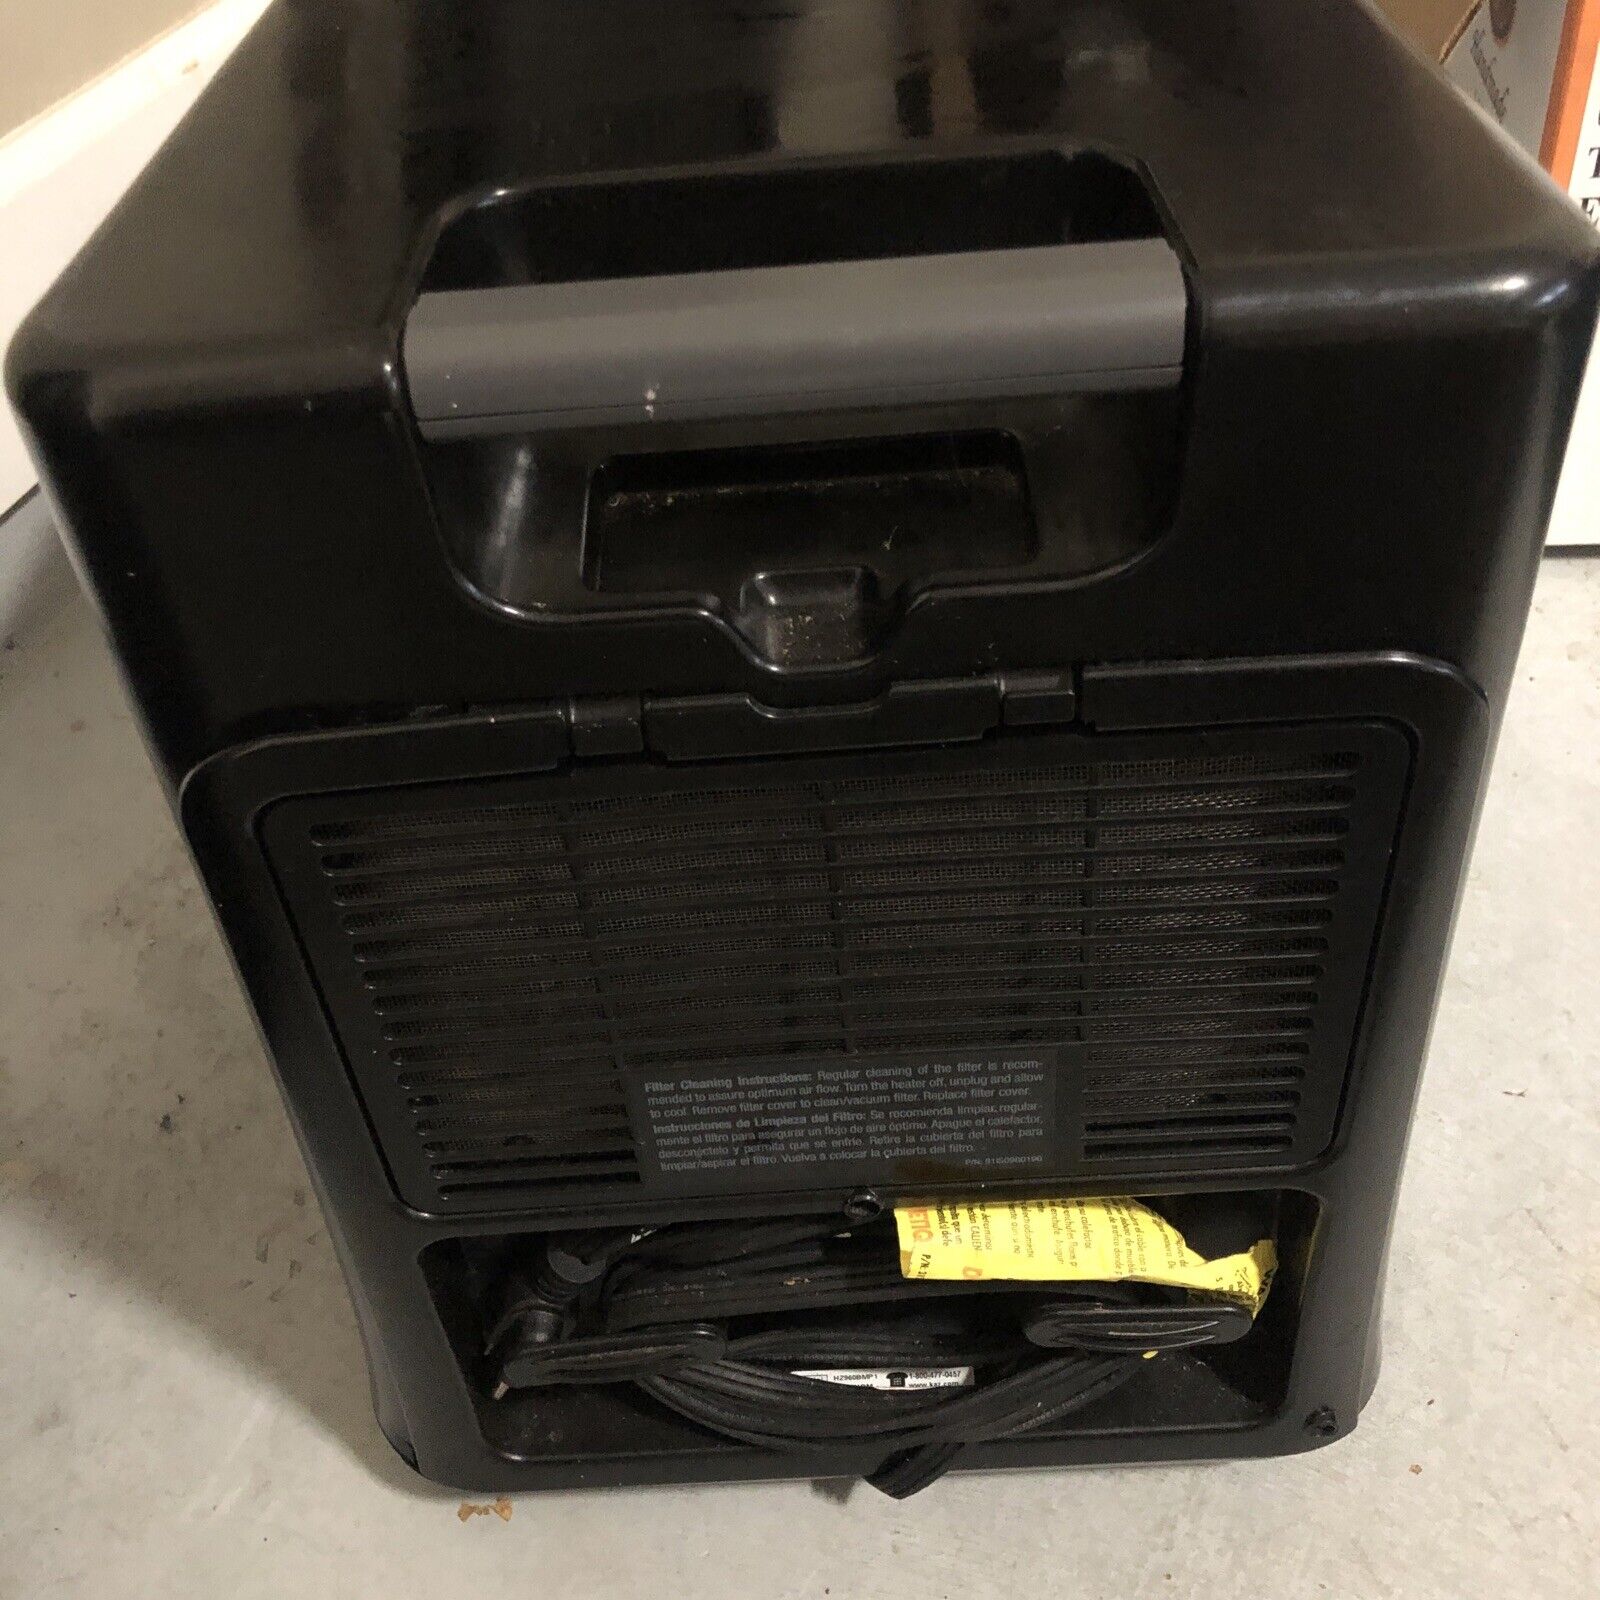 Honeywell Portable Electric Heater On Wheels (No  Remote)Set Temperature WORKS